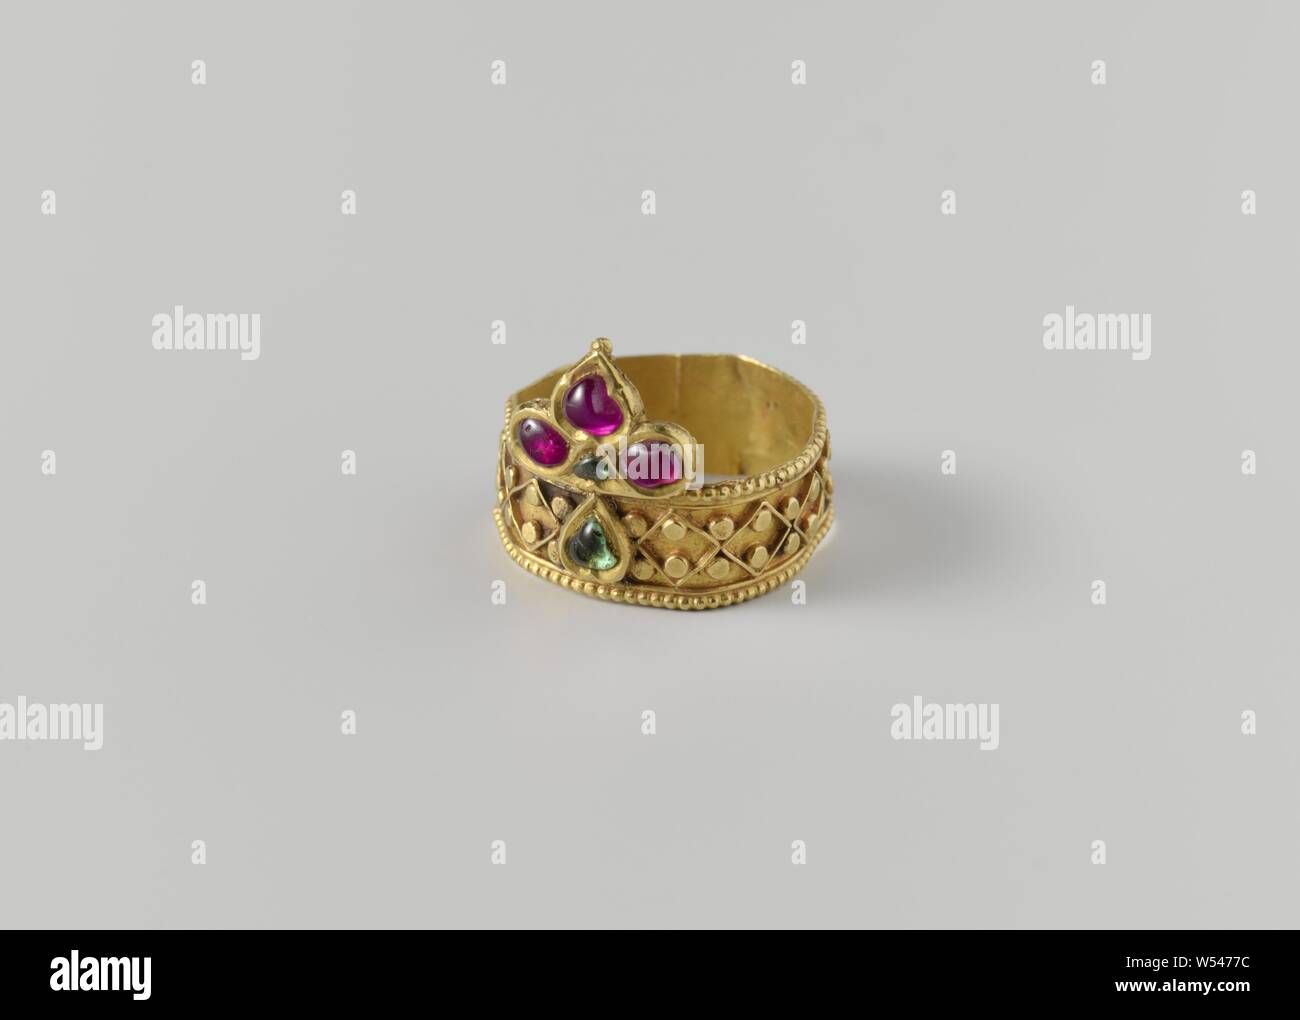 Finger ring, Finger ring (anguthi) of gold with filigree applique and inlay of red and green stones., anonymous, Surat, c. 1750, gold (metal), filigree, h 1.8 cm × d 2.2 cm Stock Photo